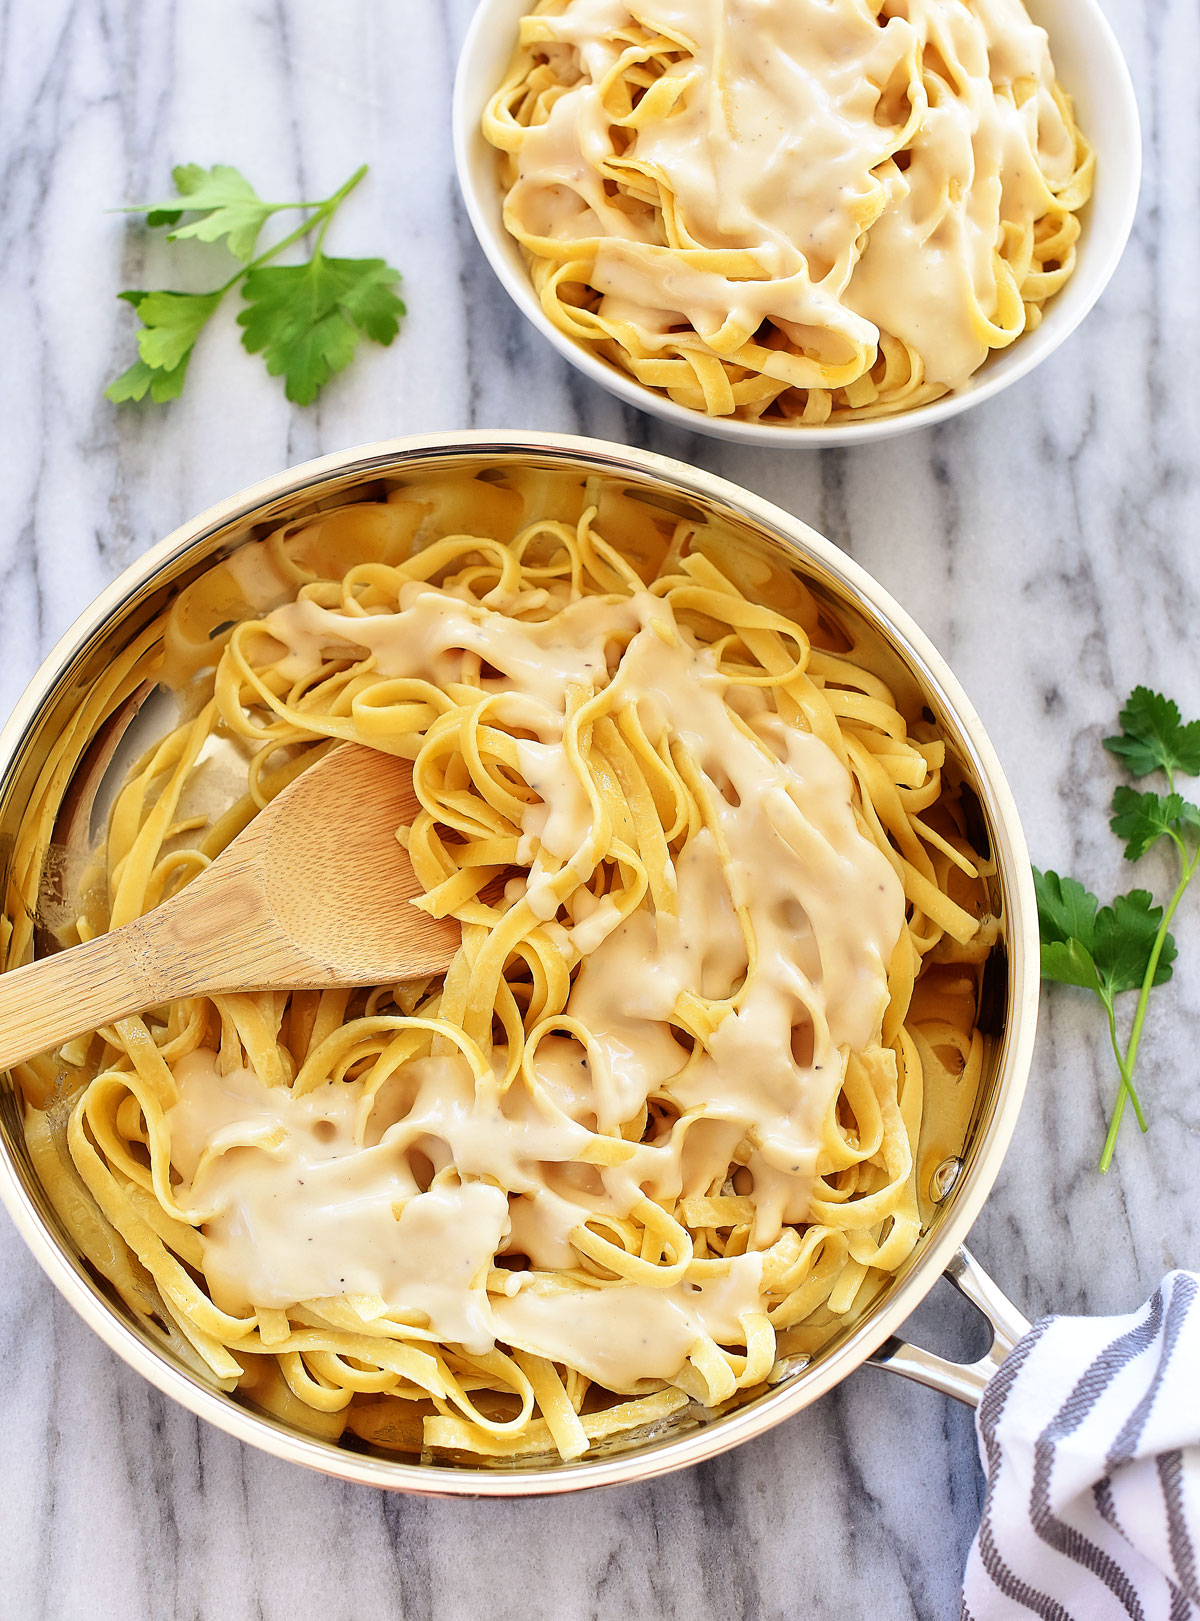 This fettuccine Alfredo is a creamy Italian pasta that uses lighter ingredients. Life-in-the-Lofthouse.com